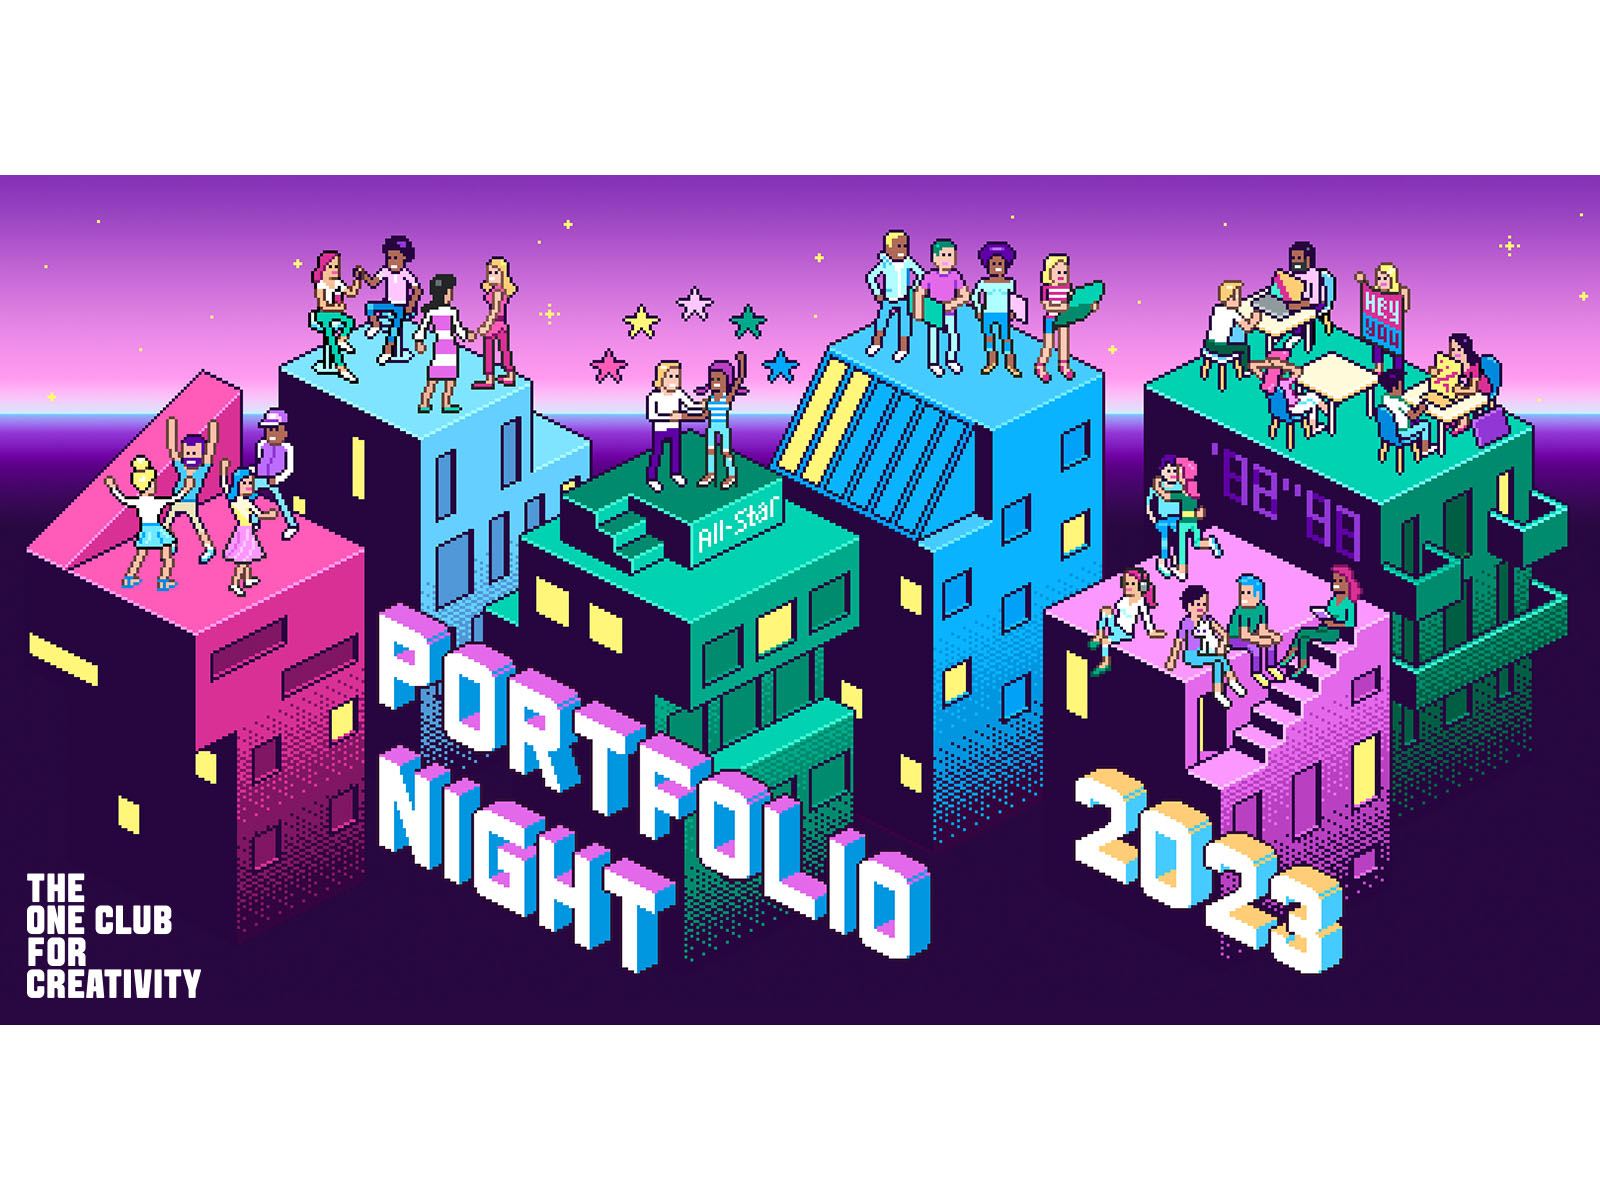 Arabad Portfolio Night 2023 to take place in 25 cities including